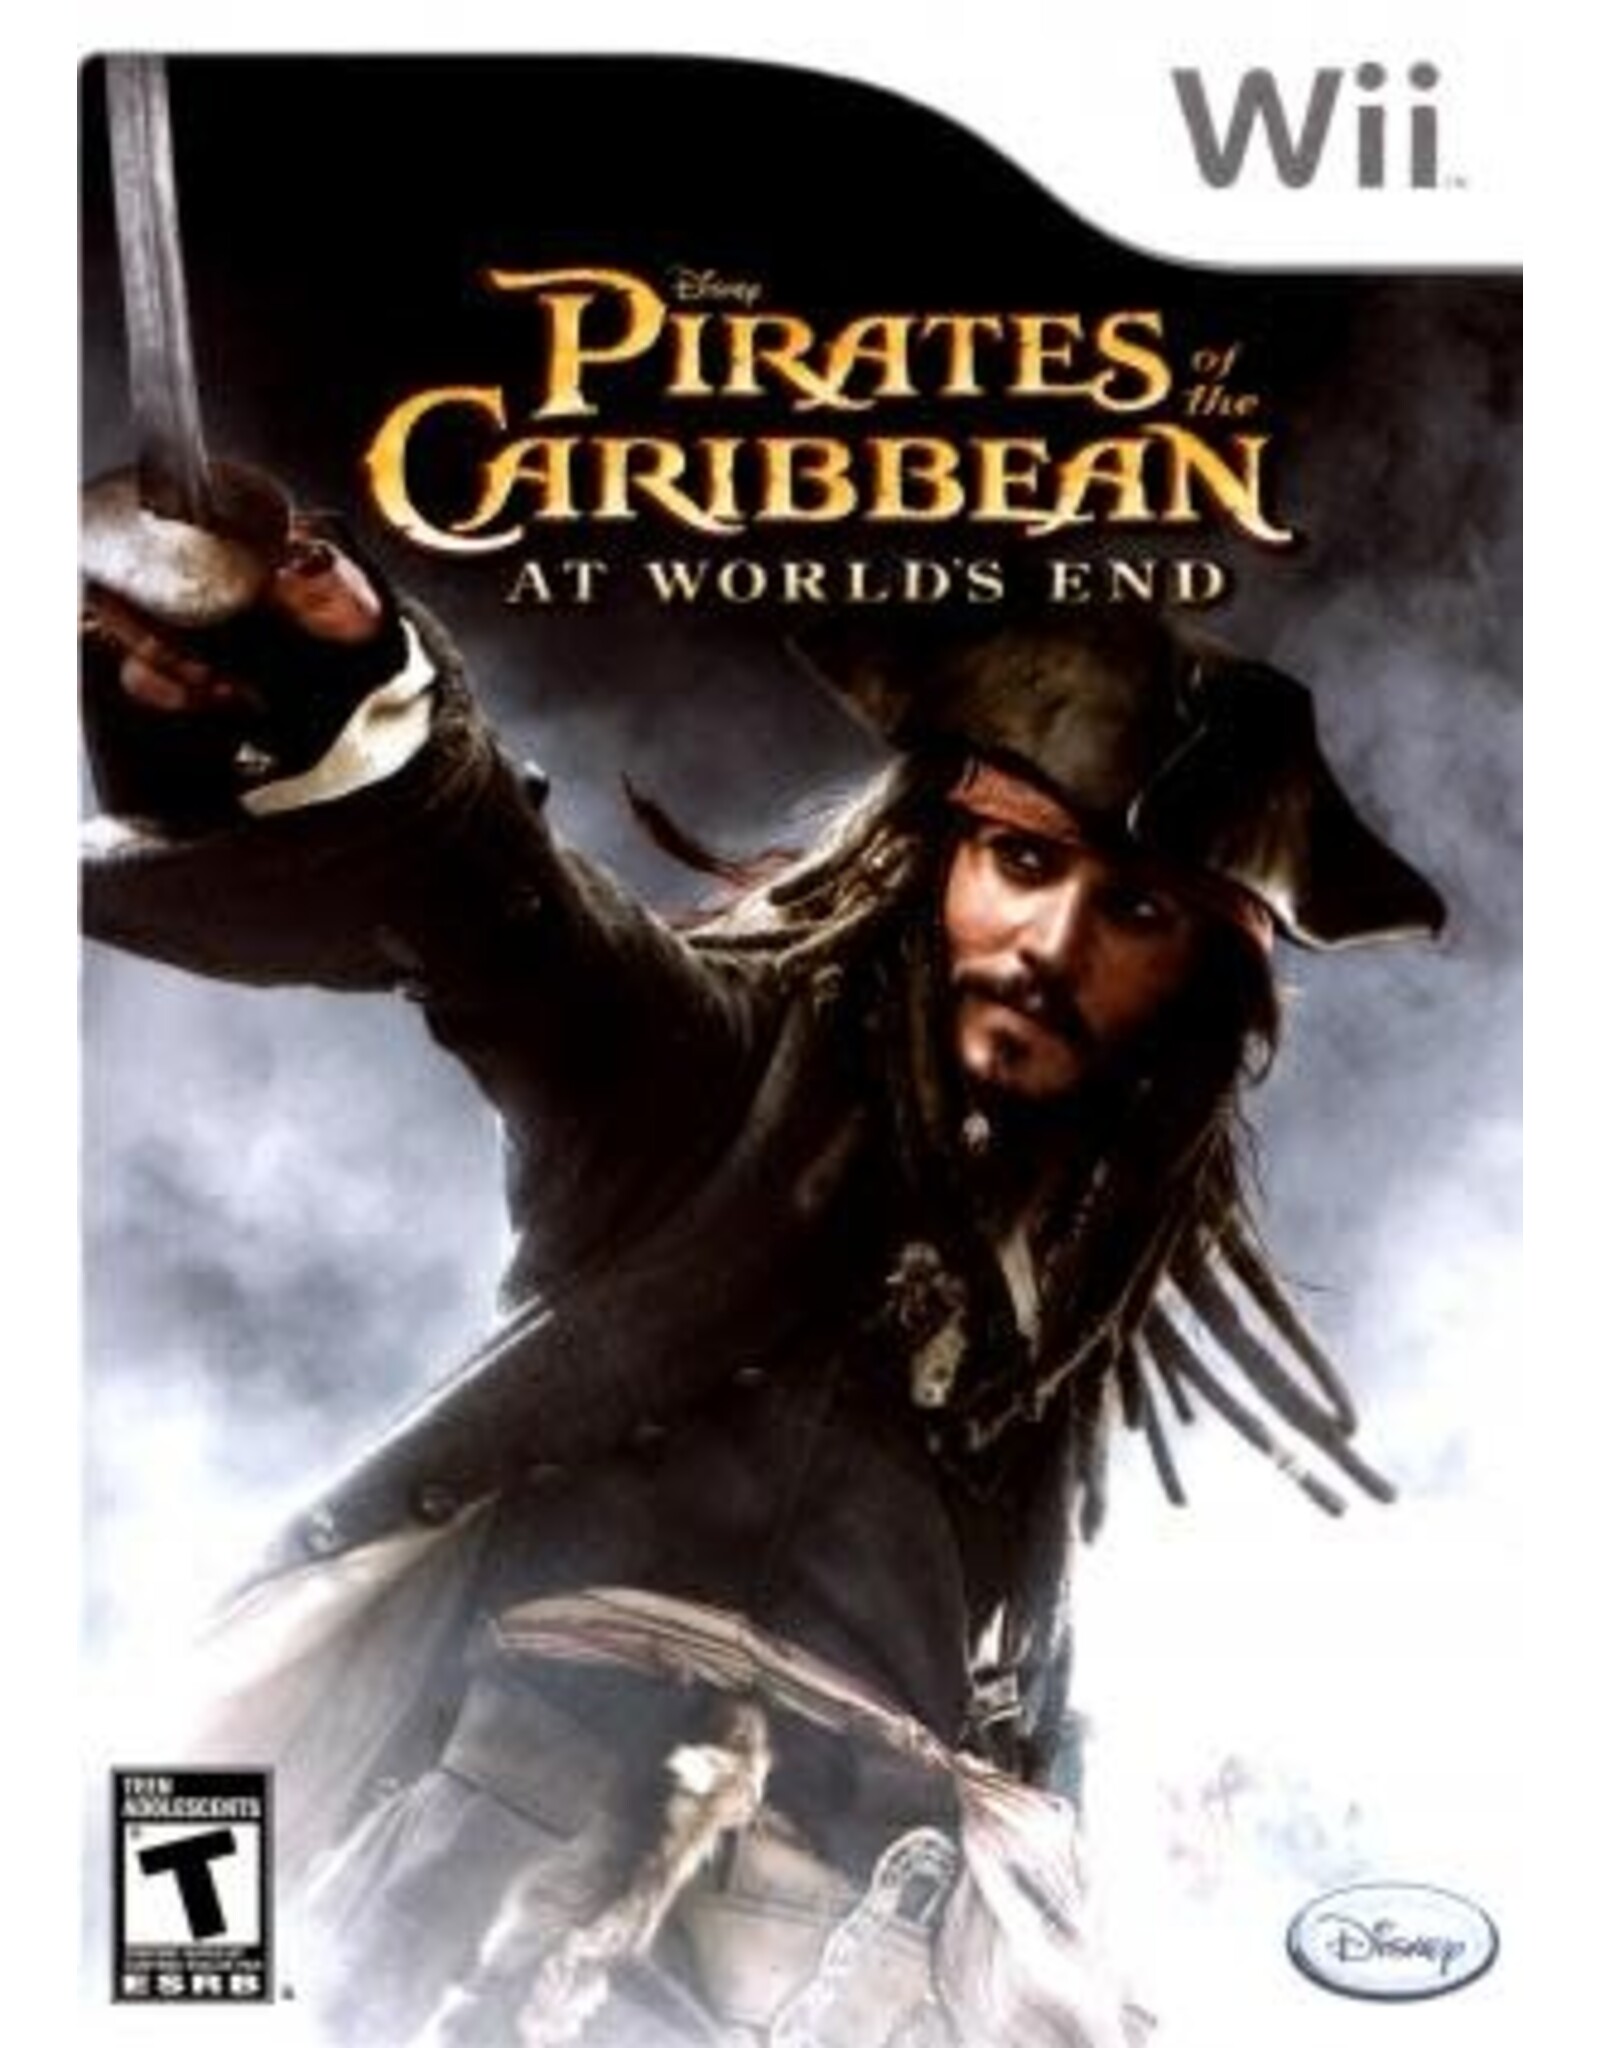 Wii Pirates of the Caribbean At World's End (CiB)